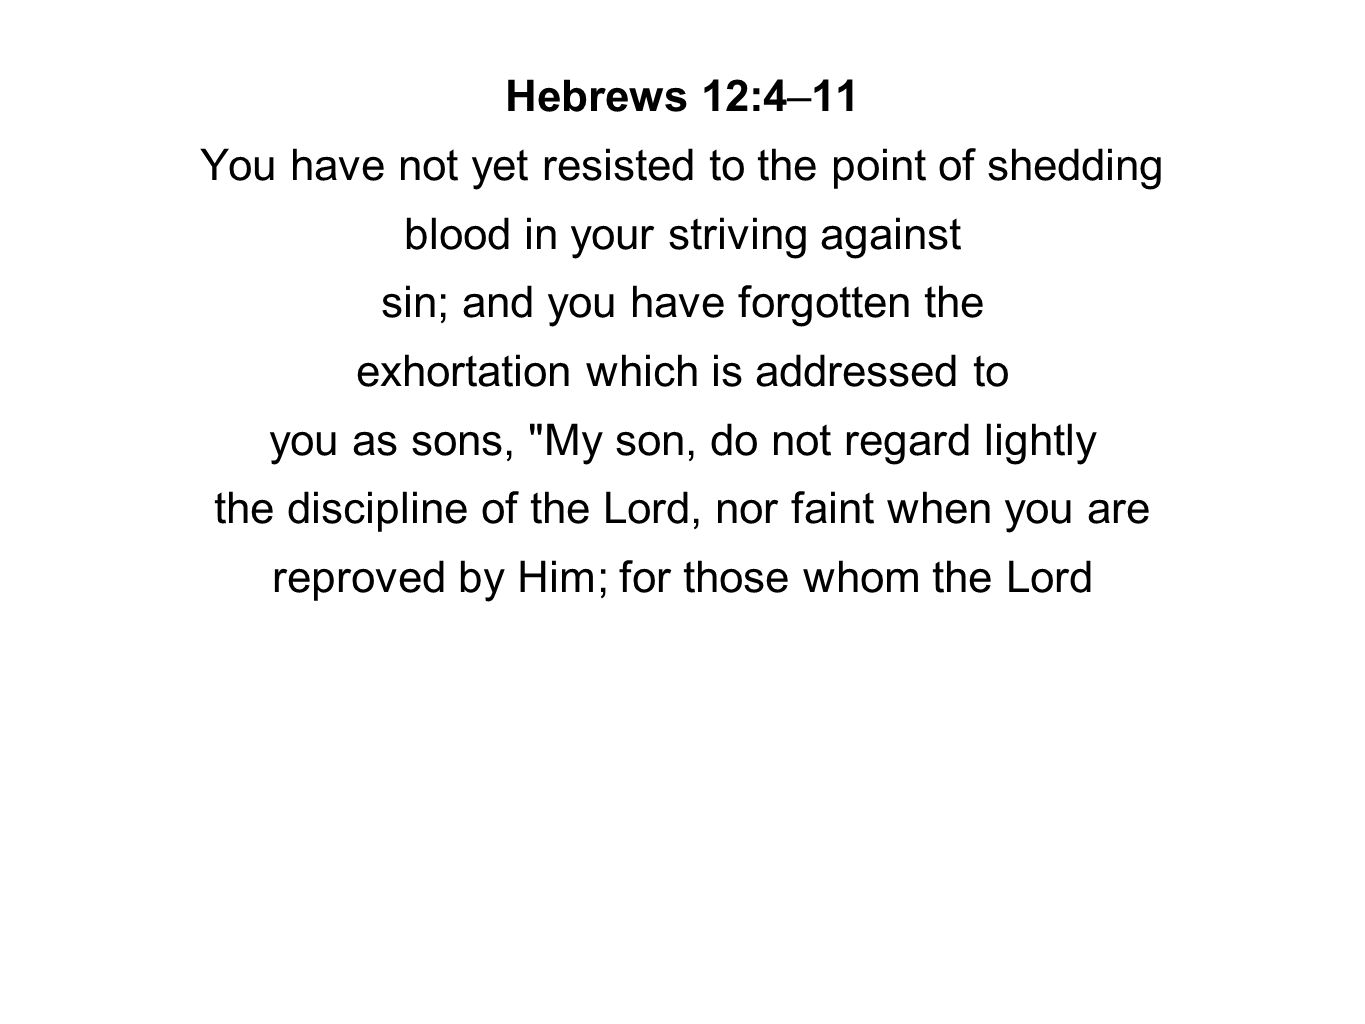 Hebrews 12:4–11 You have not yet resisted to the point of shedding blood in your striving against sin; and you have forgotten the exhortation which is addressed to you as sons, My son, do not regard lightly the discipline of the Lord, nor faint when you are reproved by Him; for those whom the Lord